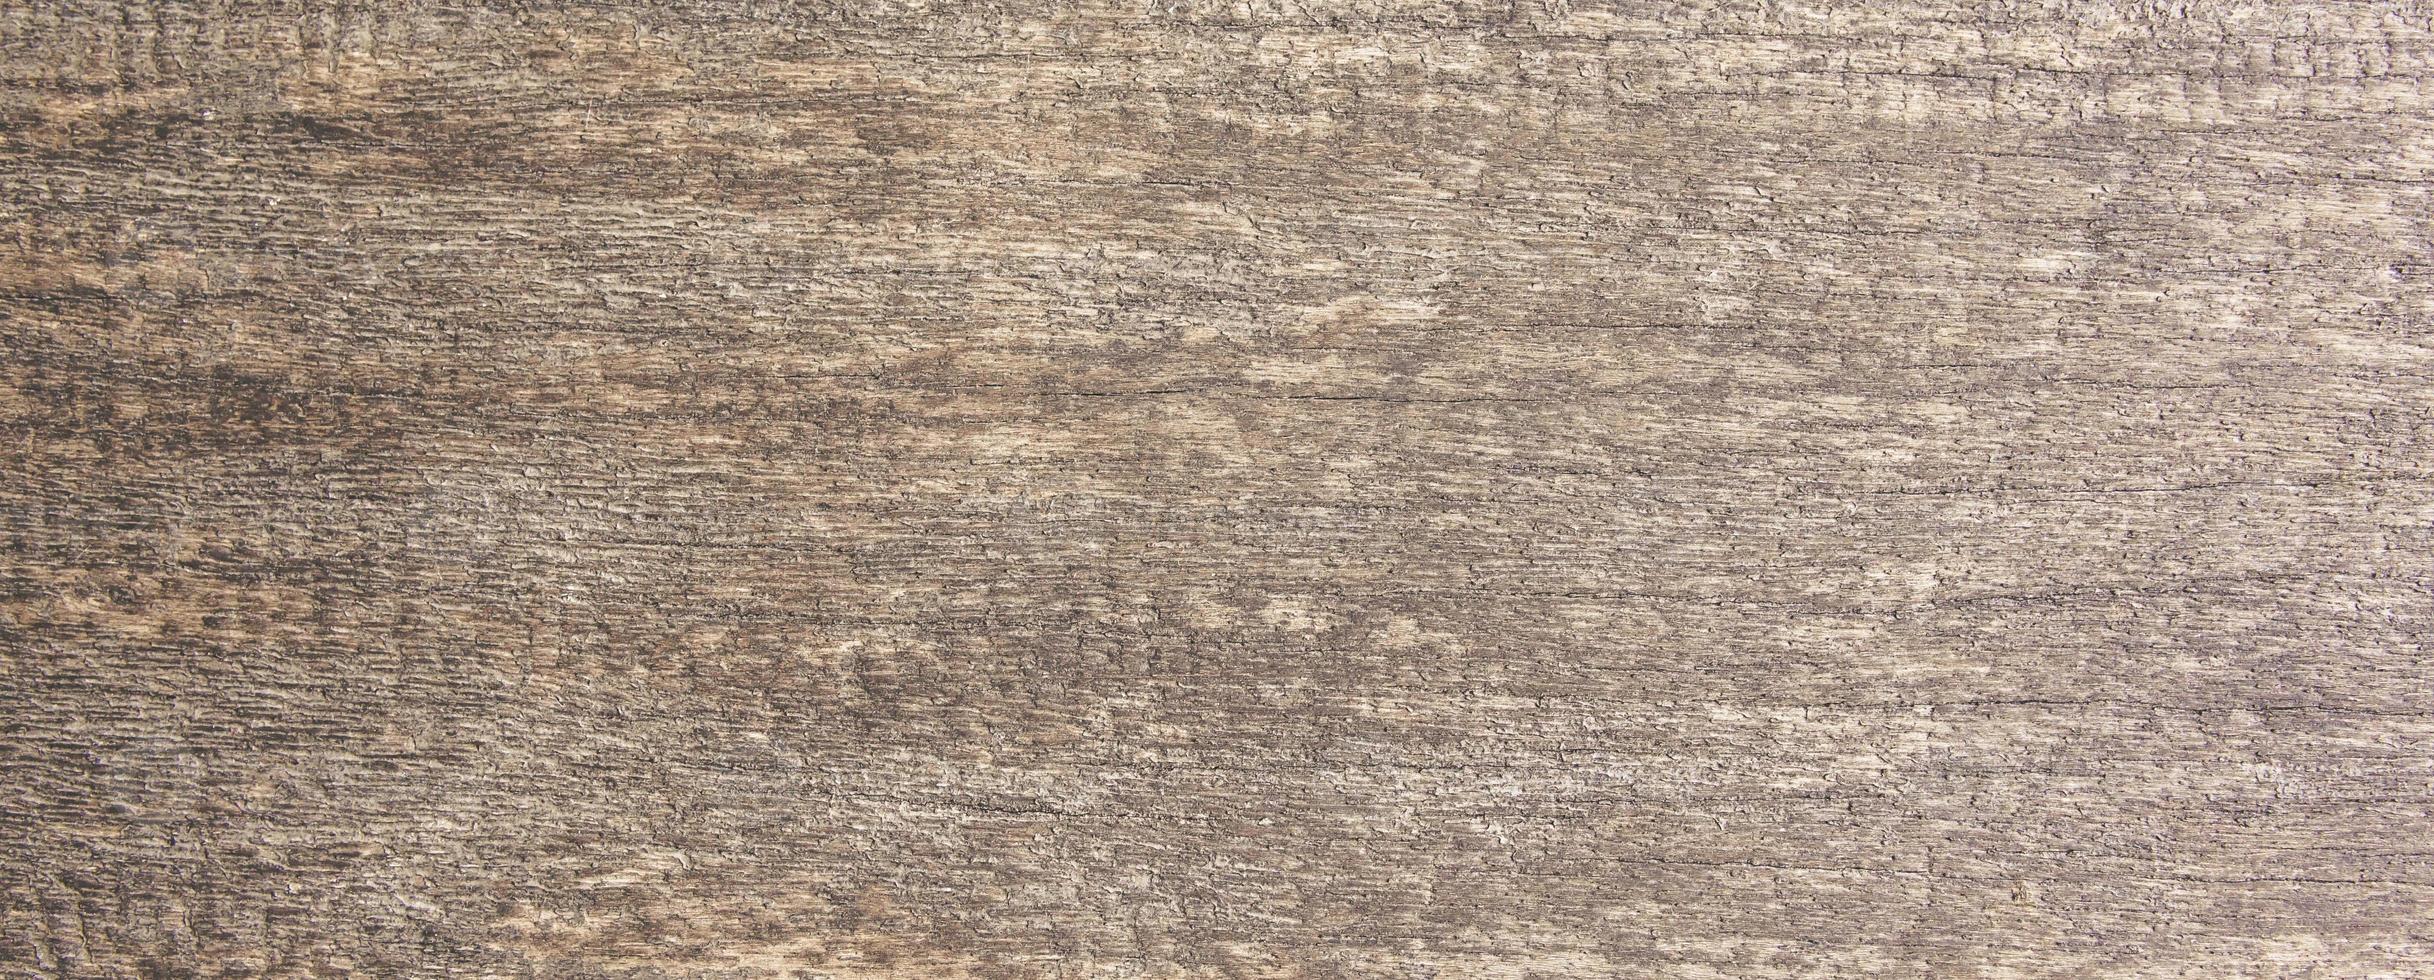 Wood texture background, wood pattern texture. photo